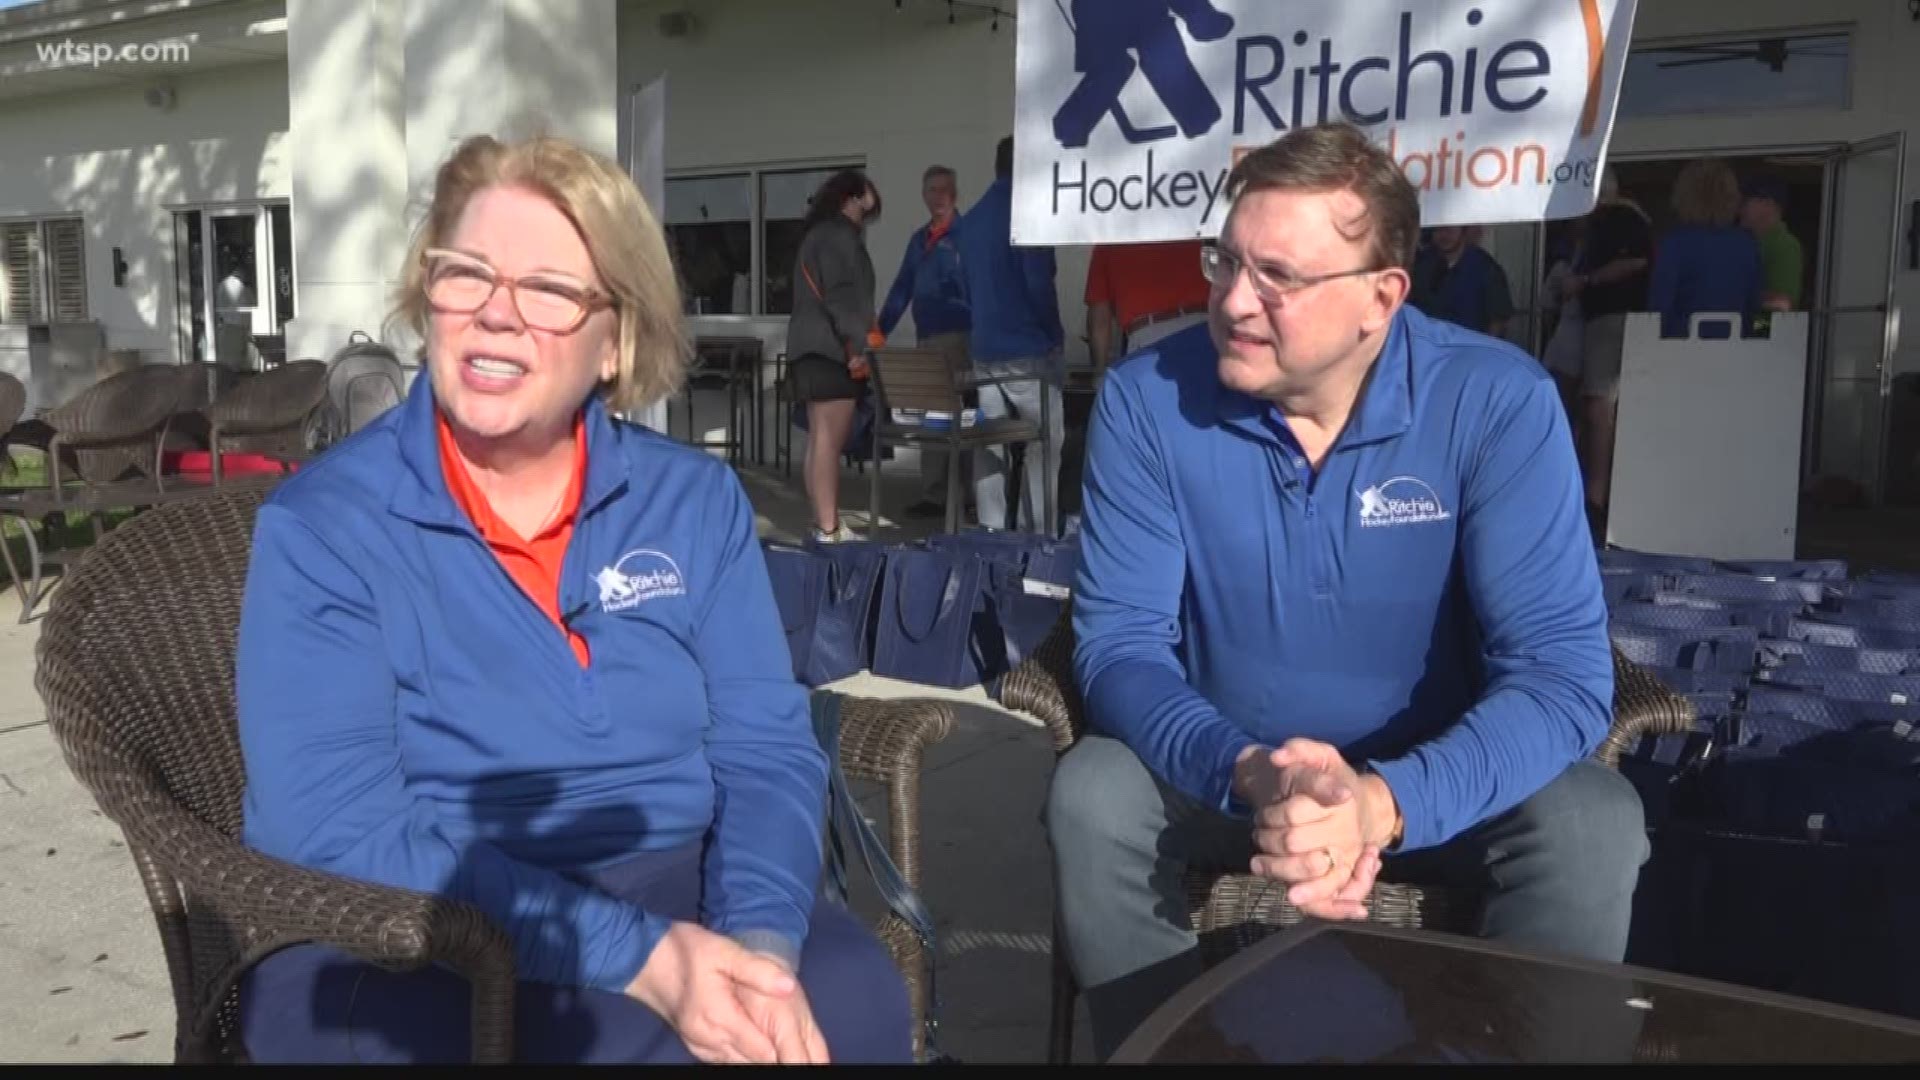 The Jason Ritchie Foundation has given $1.6 million to students who play hockey since 2009.